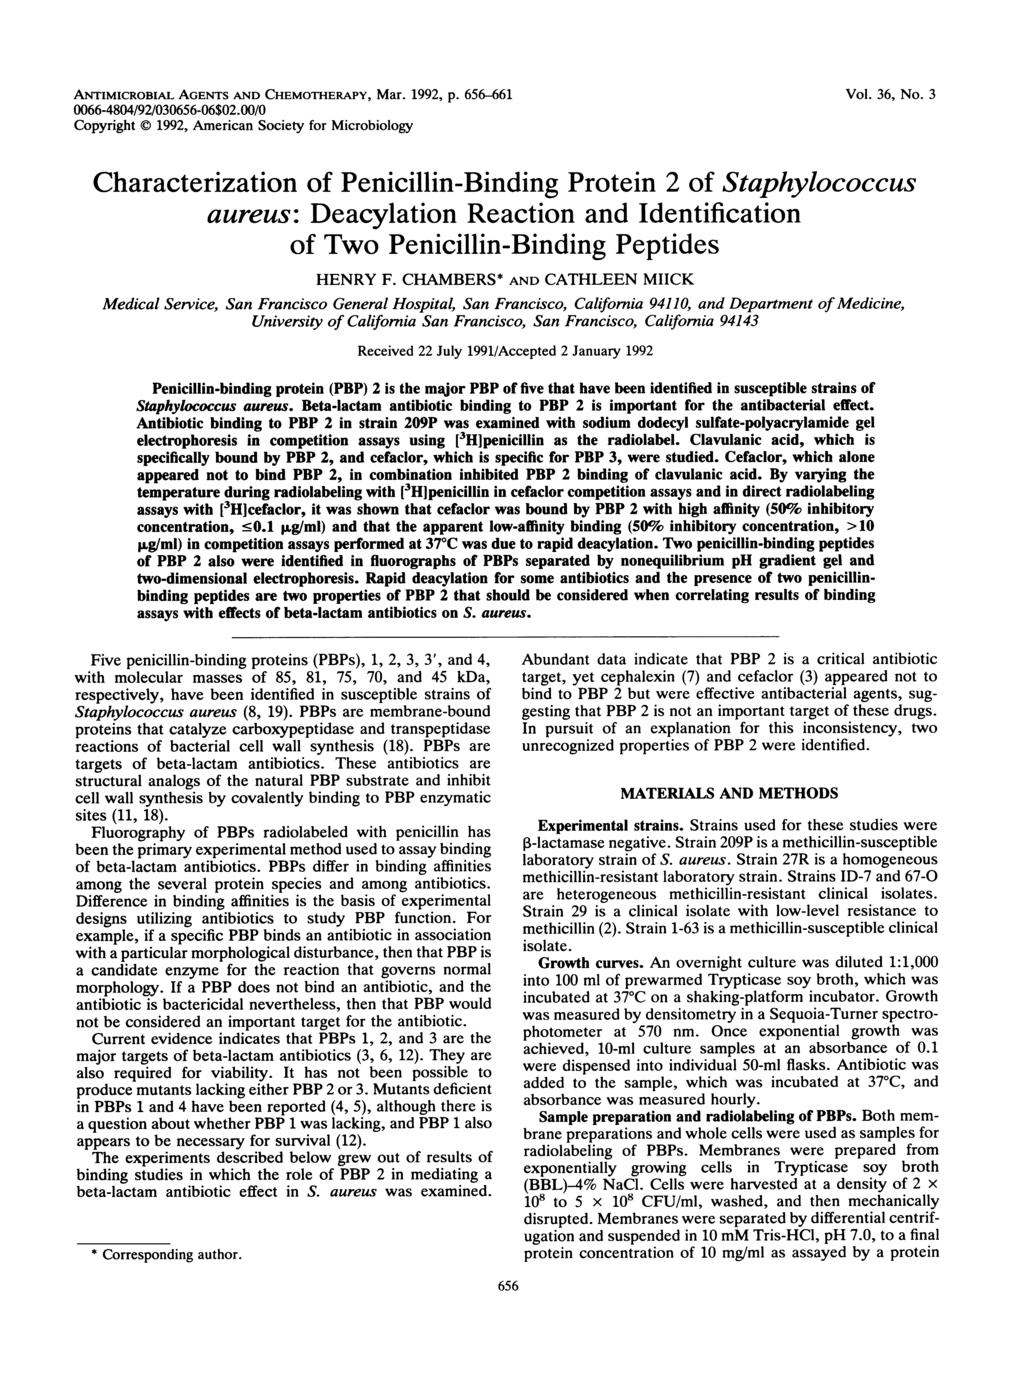 ANTIMICROBIAL AGENTS AND CHEMOTHERAPY, Mar. 1992, P. 656-661 0066-4804/92/030656-06$02.00/0 Copyright 1992, American Society for Microbiology Vol. 36, No.